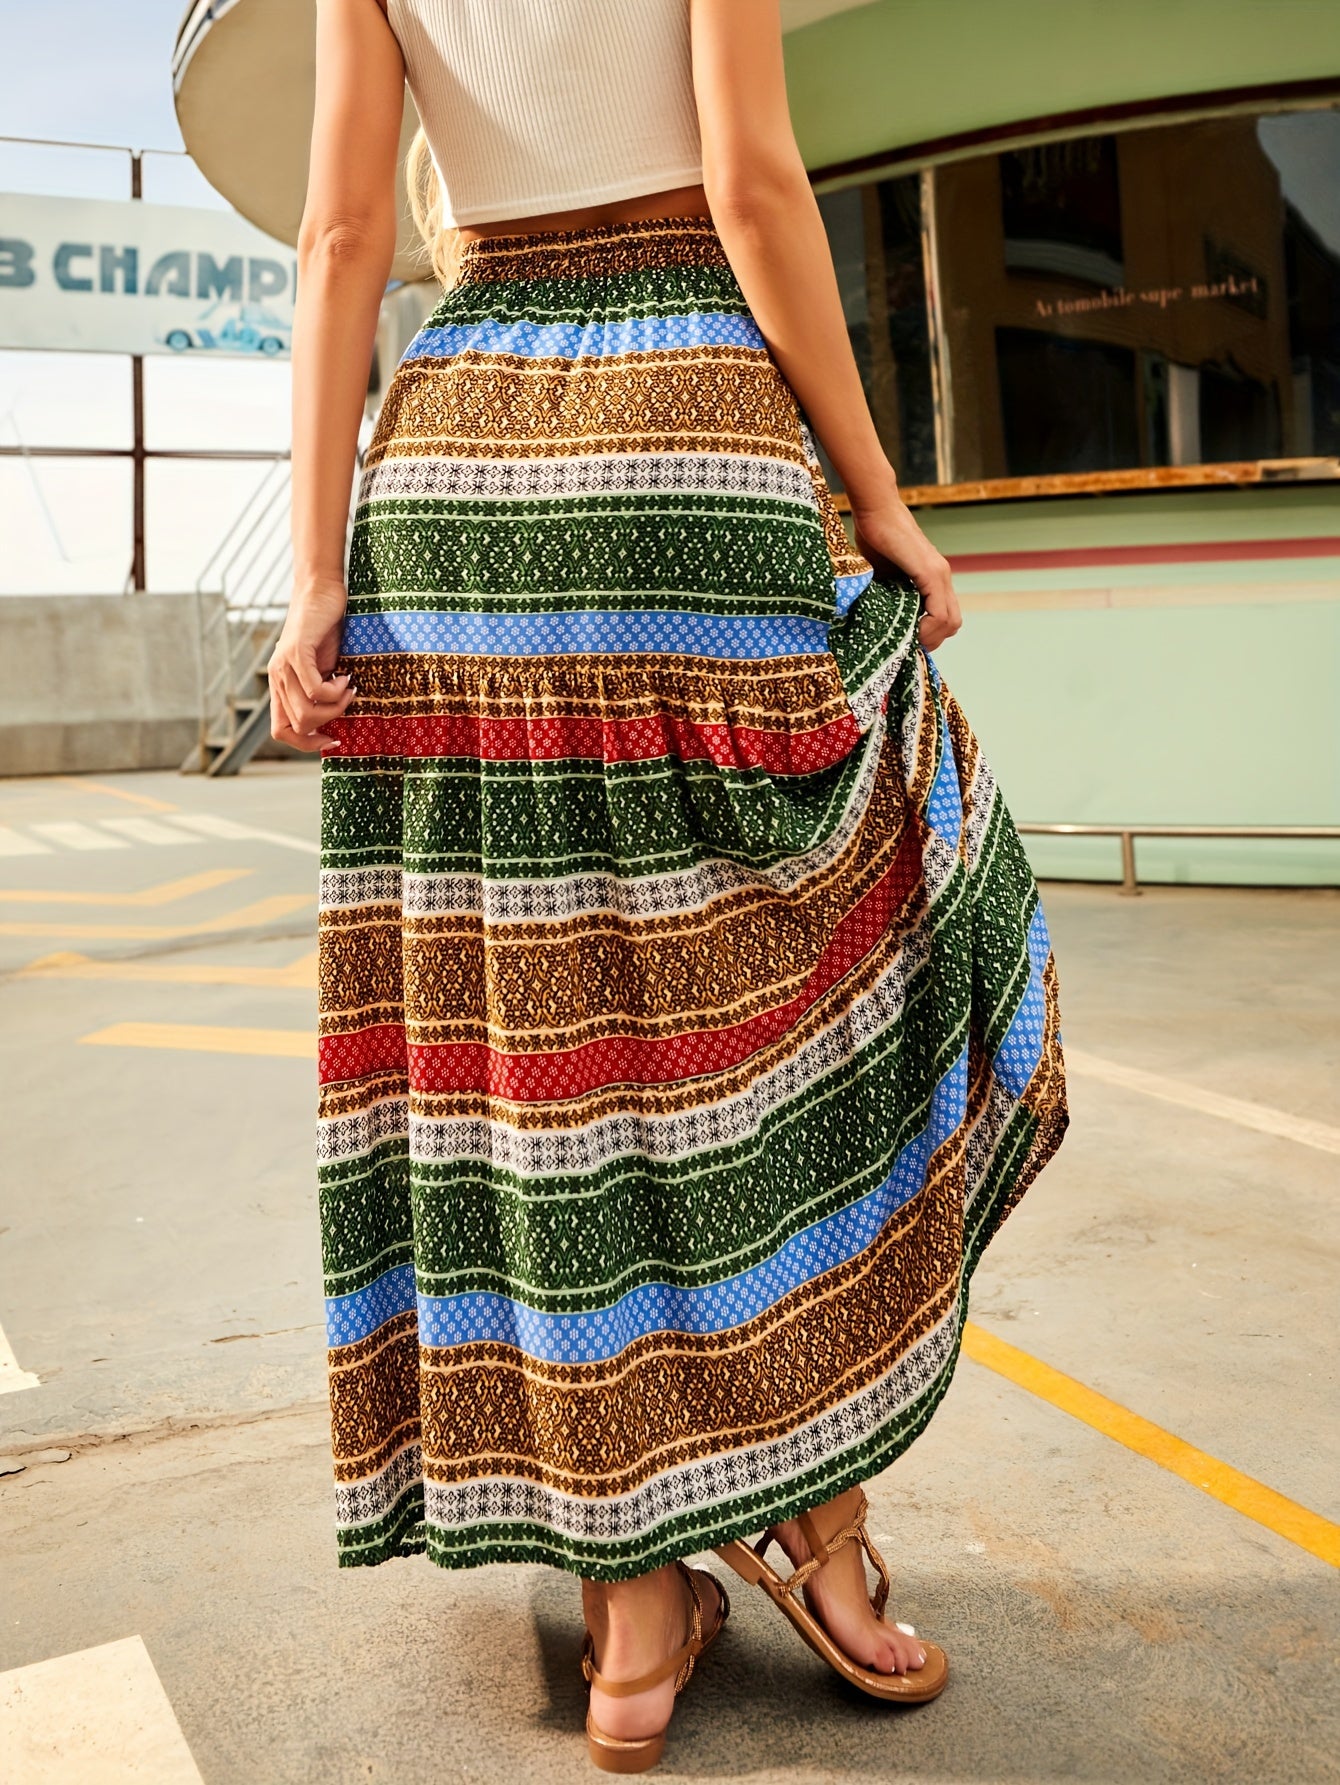 Bohe Striped Maxi Skirt for Spring and Summer, Women's Maxi Skirt